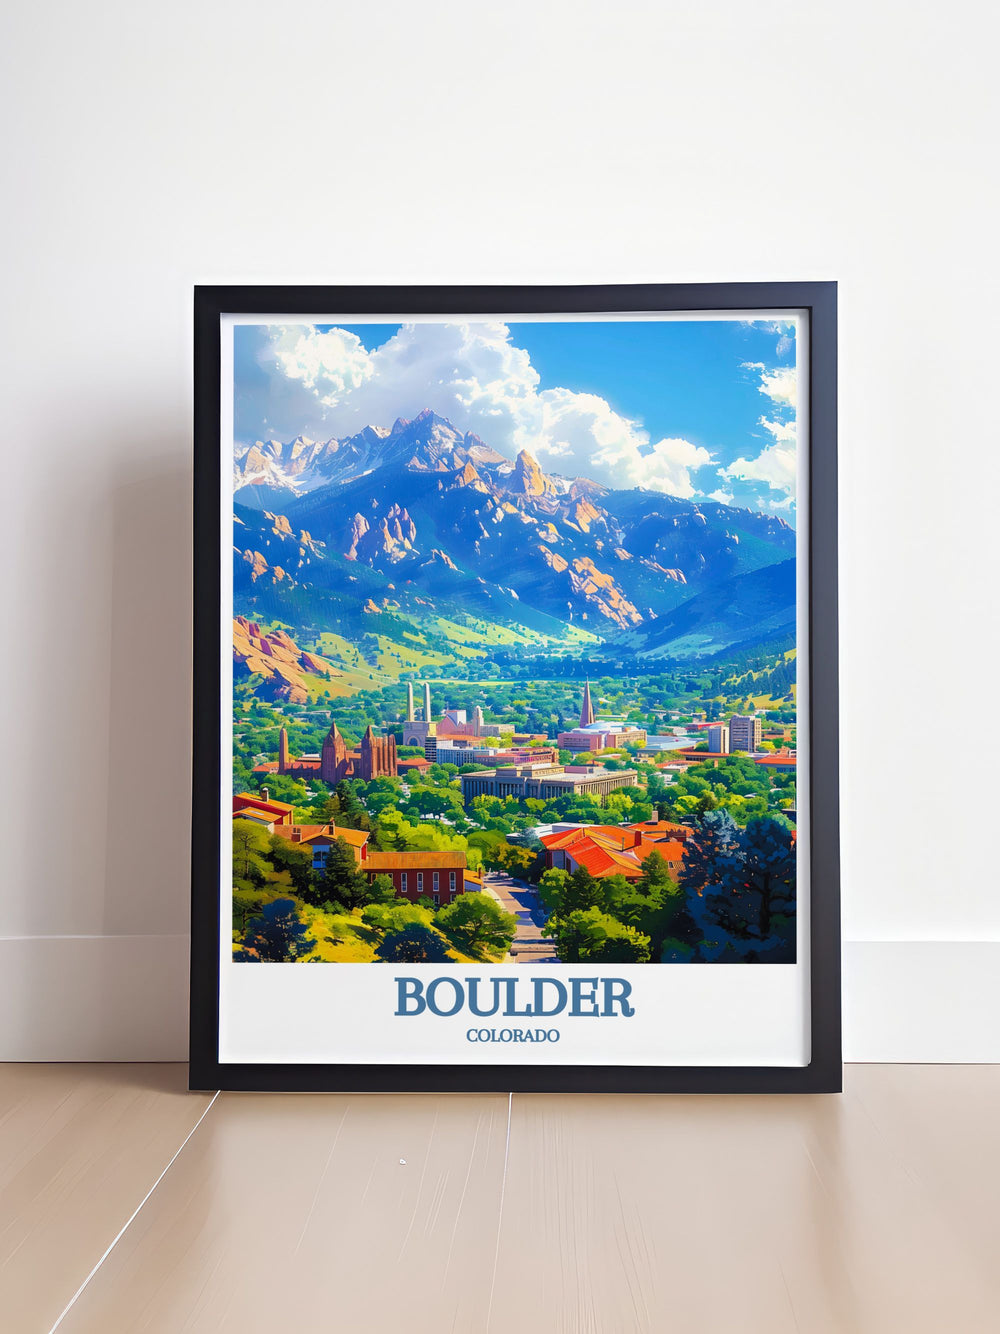 Beautifully framed art piece featuring the Flatirons of Boulder, Colorado, highlighting the dramatic landscape and rugged beauty of this beloved landmark. Ideal for adding a striking focal point to any room in your home or office.